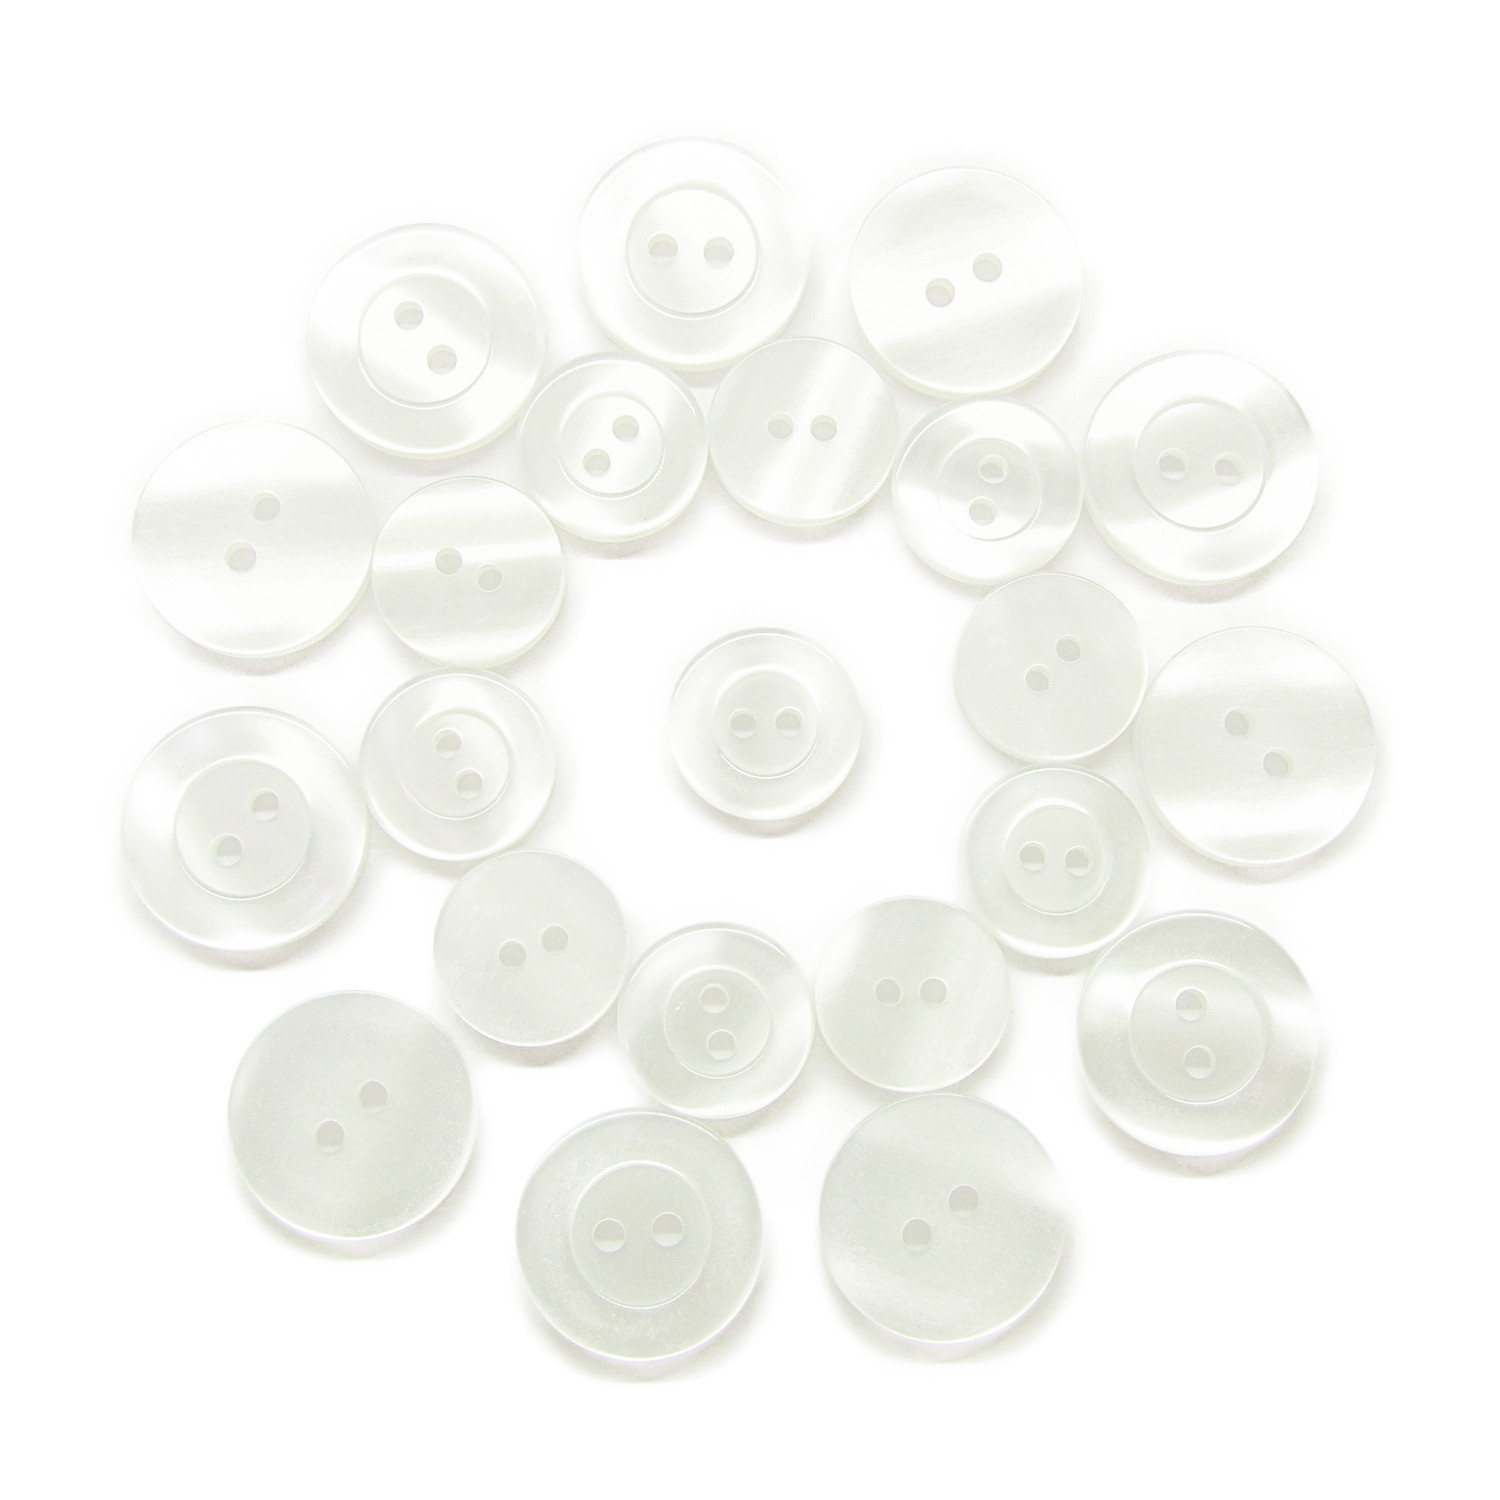 ButtonMode Lab Coat Buttons Full Set includes 11 Jacket Front Buttons x 19mm (3/4 Inch), 11 Jacket Sleeve Buttons x 15mm (5/8 Inch), 22-Buttons